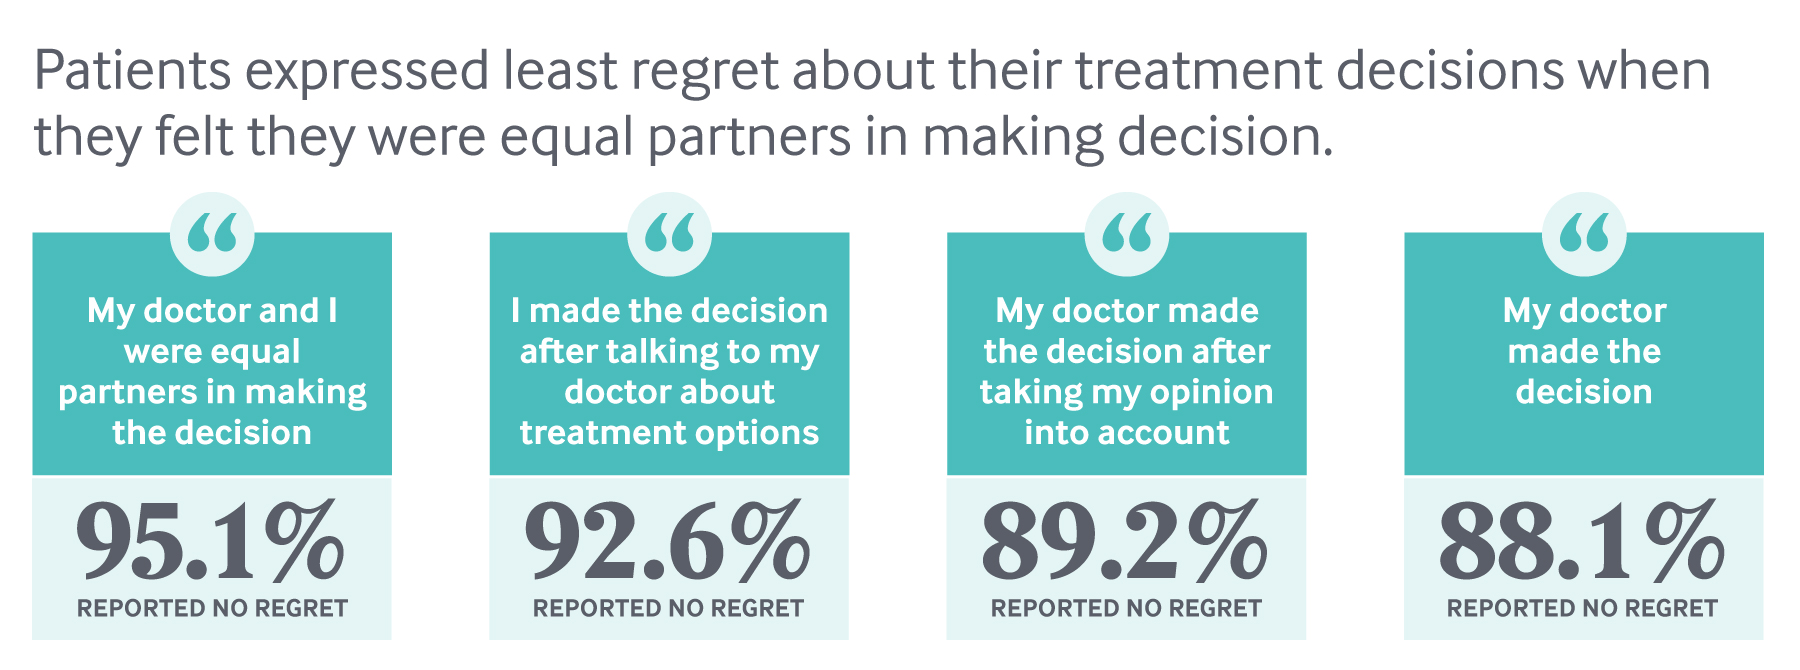 Transforming Care Engaging Patients in Shared Decision-Making